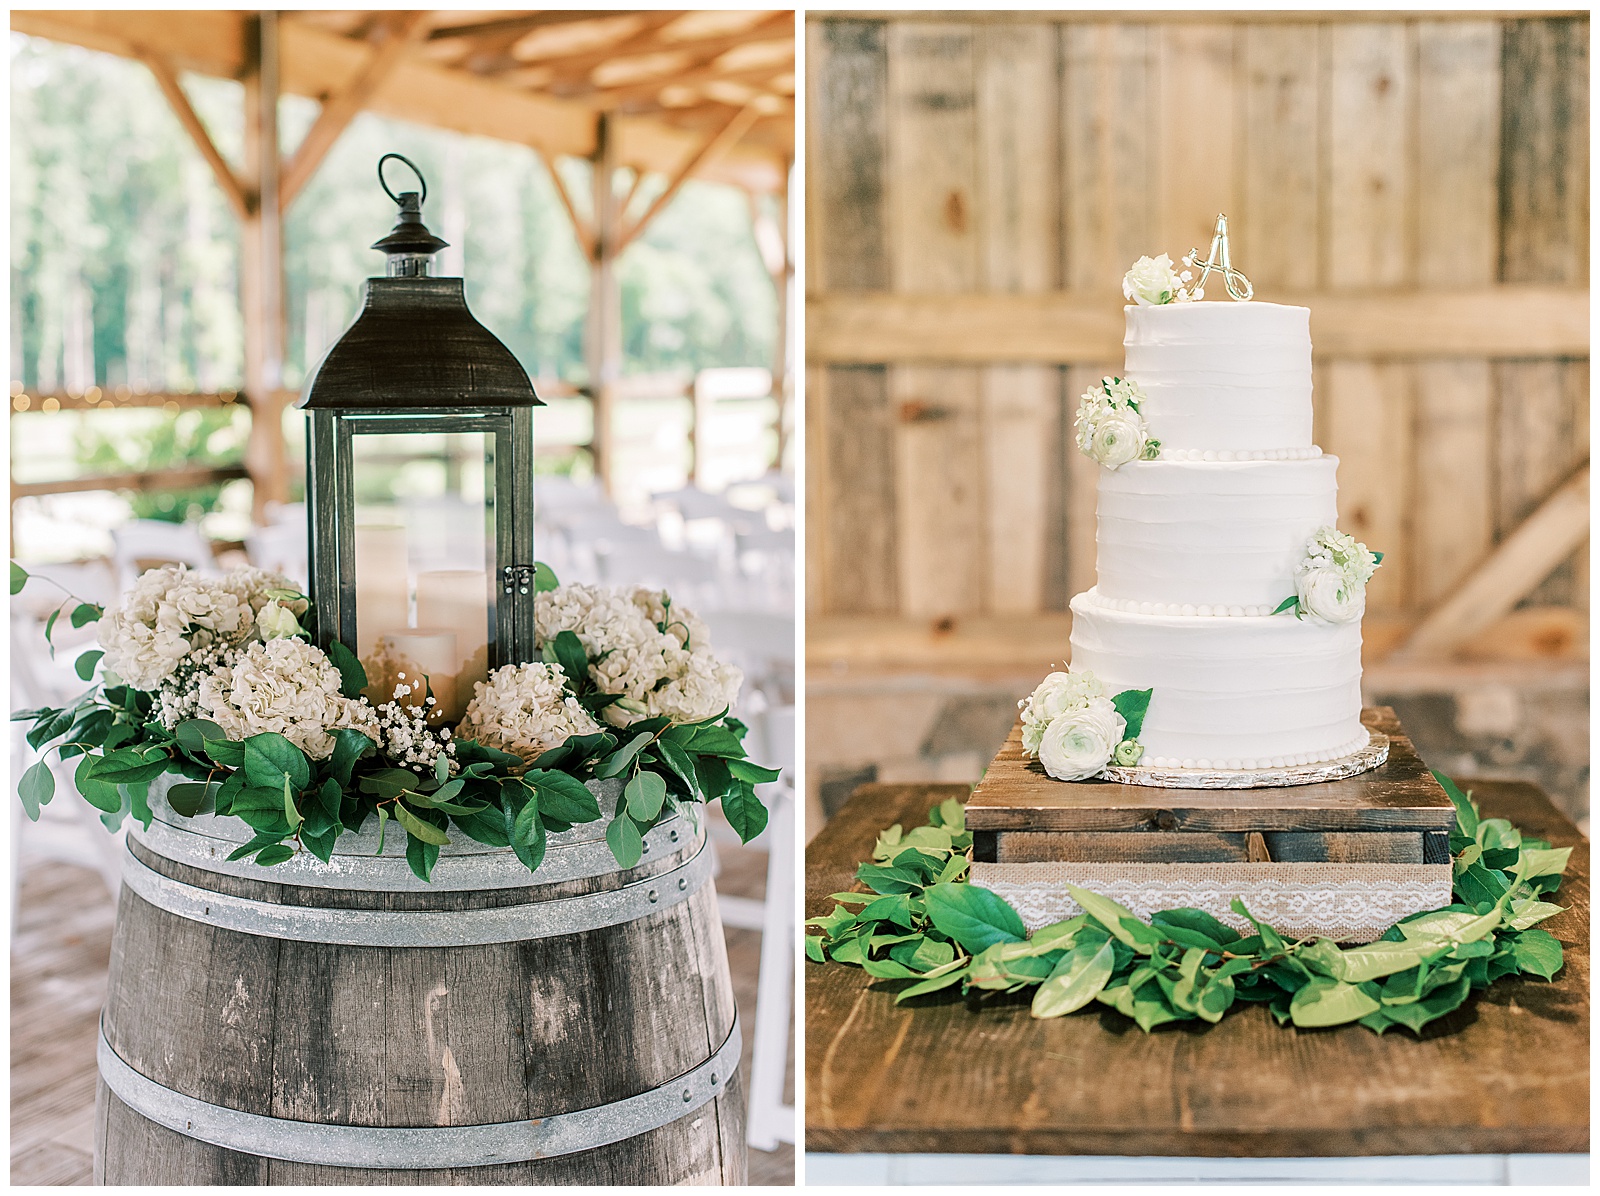 three tiered white cake and lantern on barrel reception area detail shots